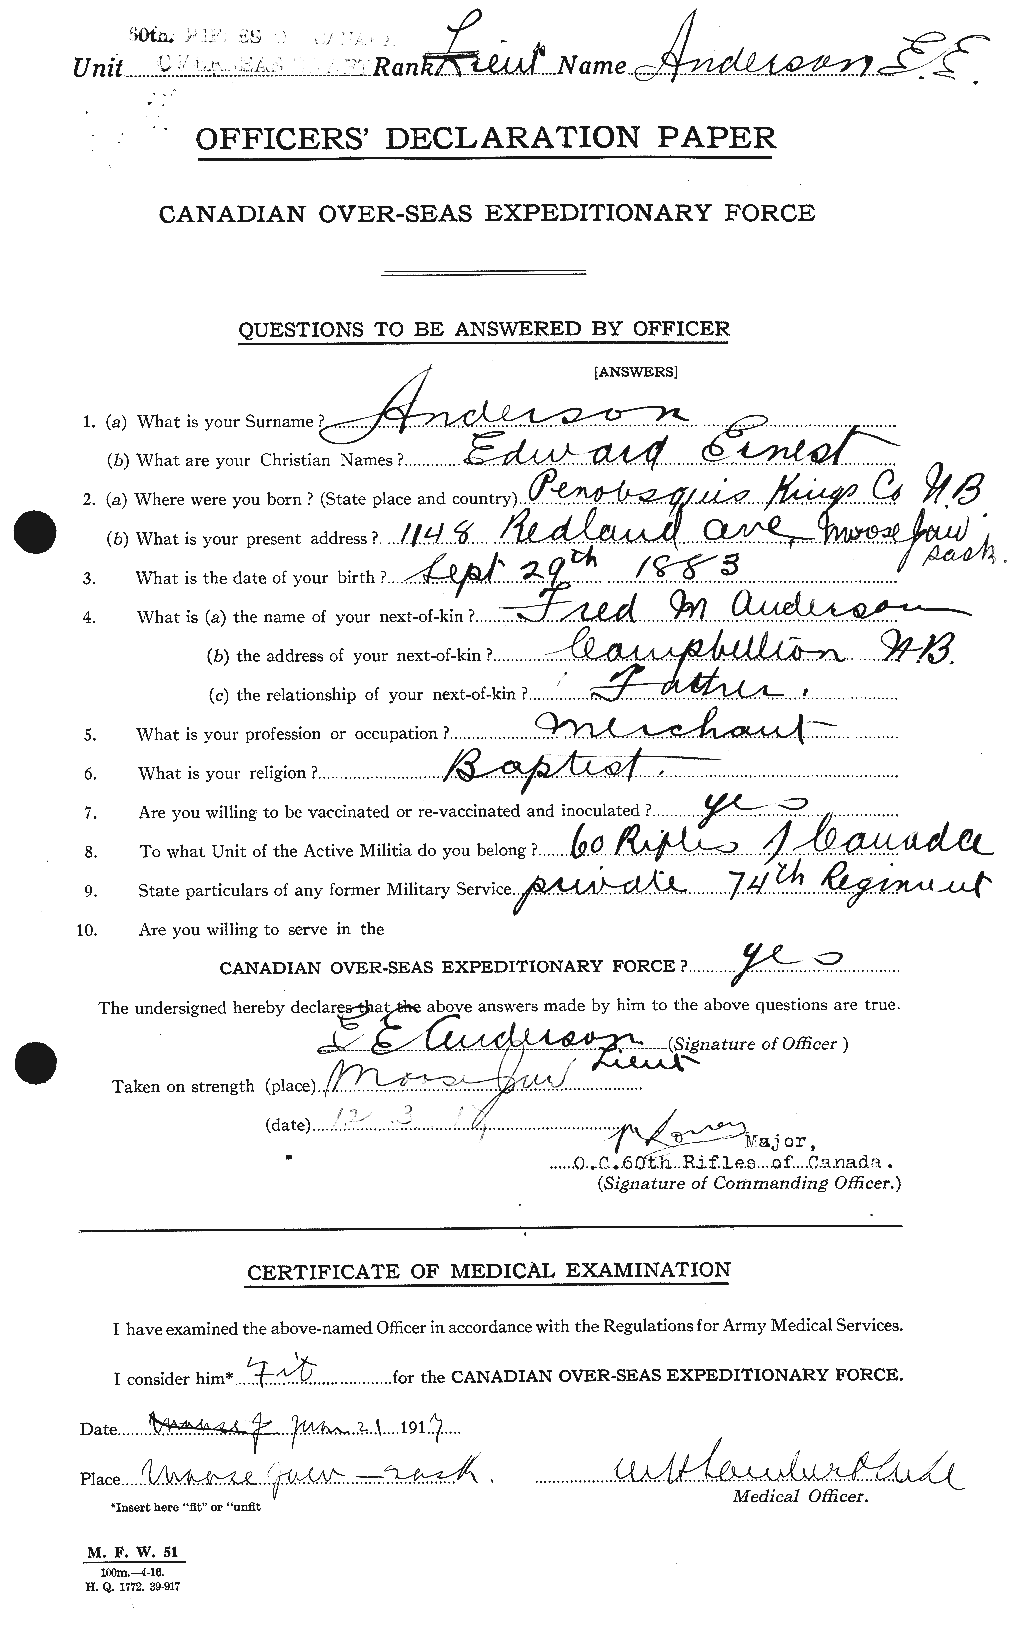 Personnel Records of the First World War - CEF 209935a